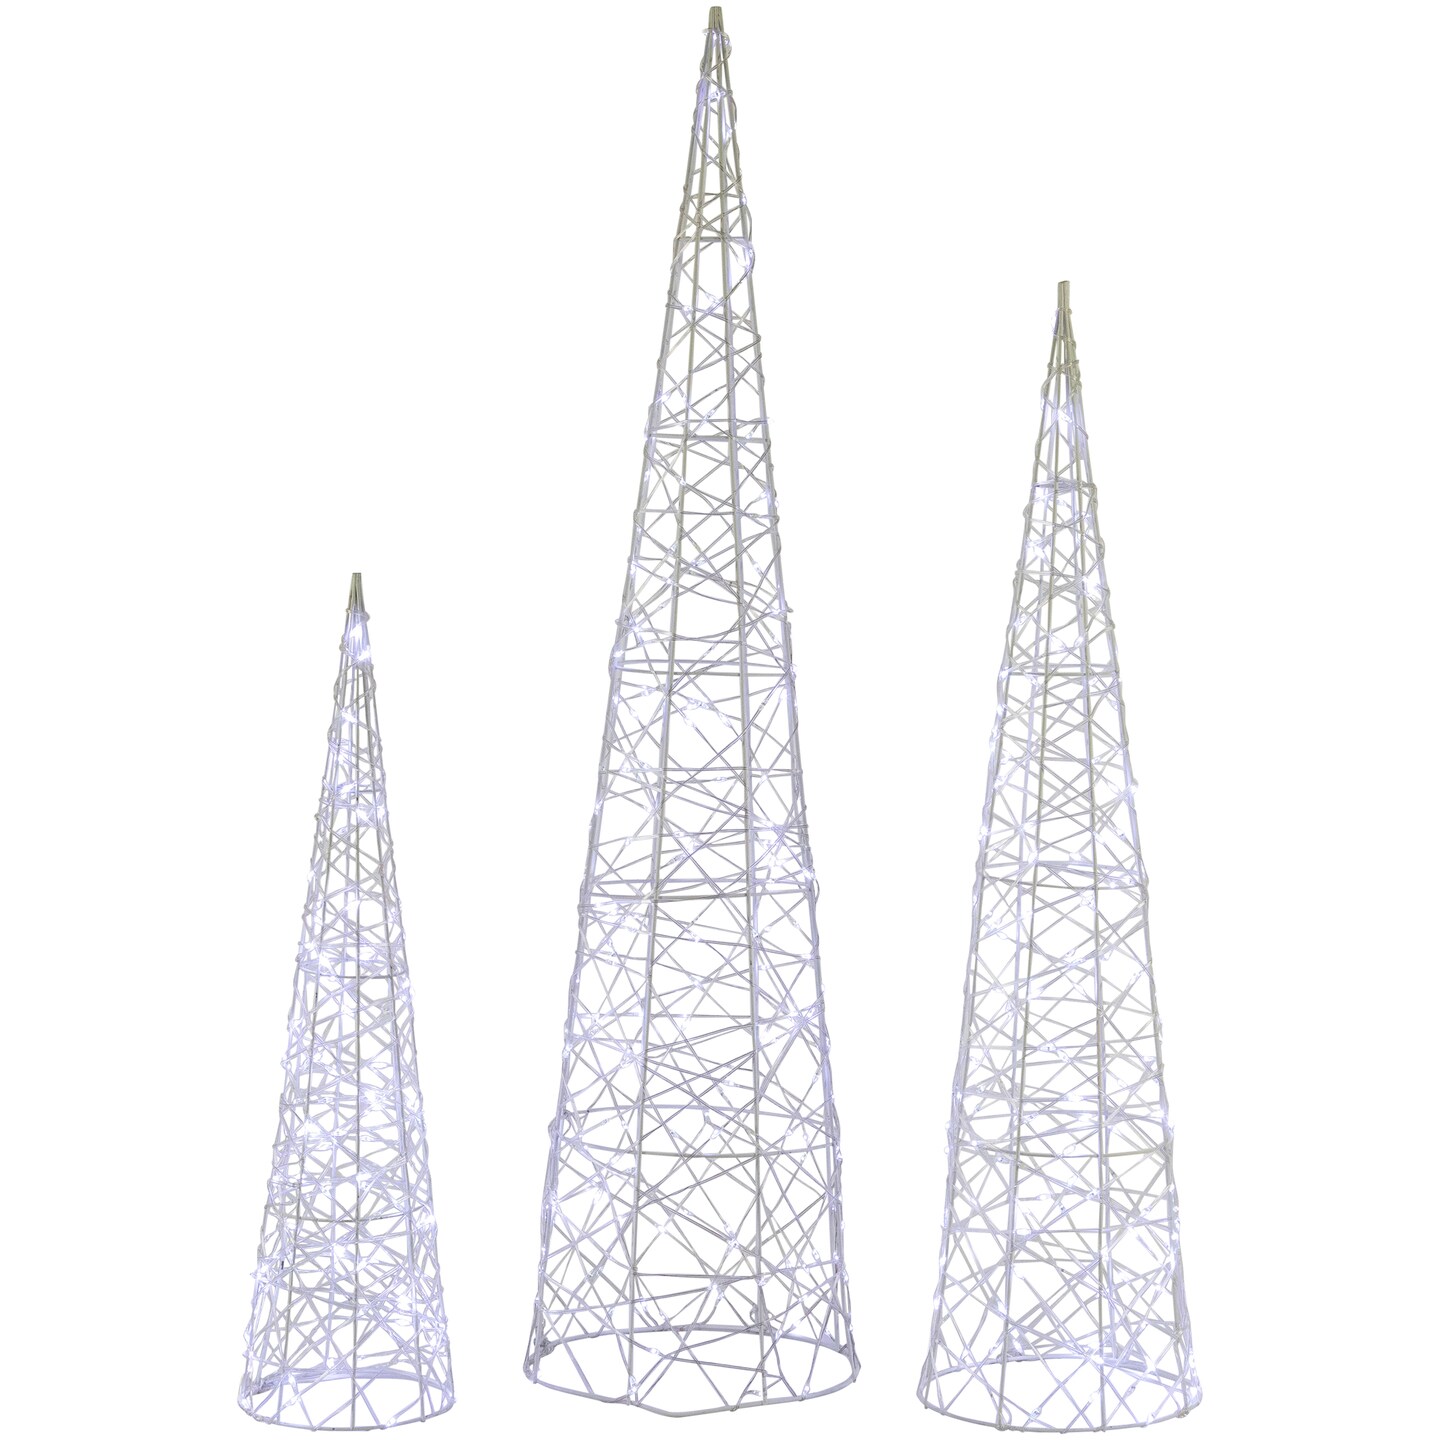 Northlight Set of 3 LED Lighted Twinkling Cone Trees Christmas Yard Decoration - Cool White Lights